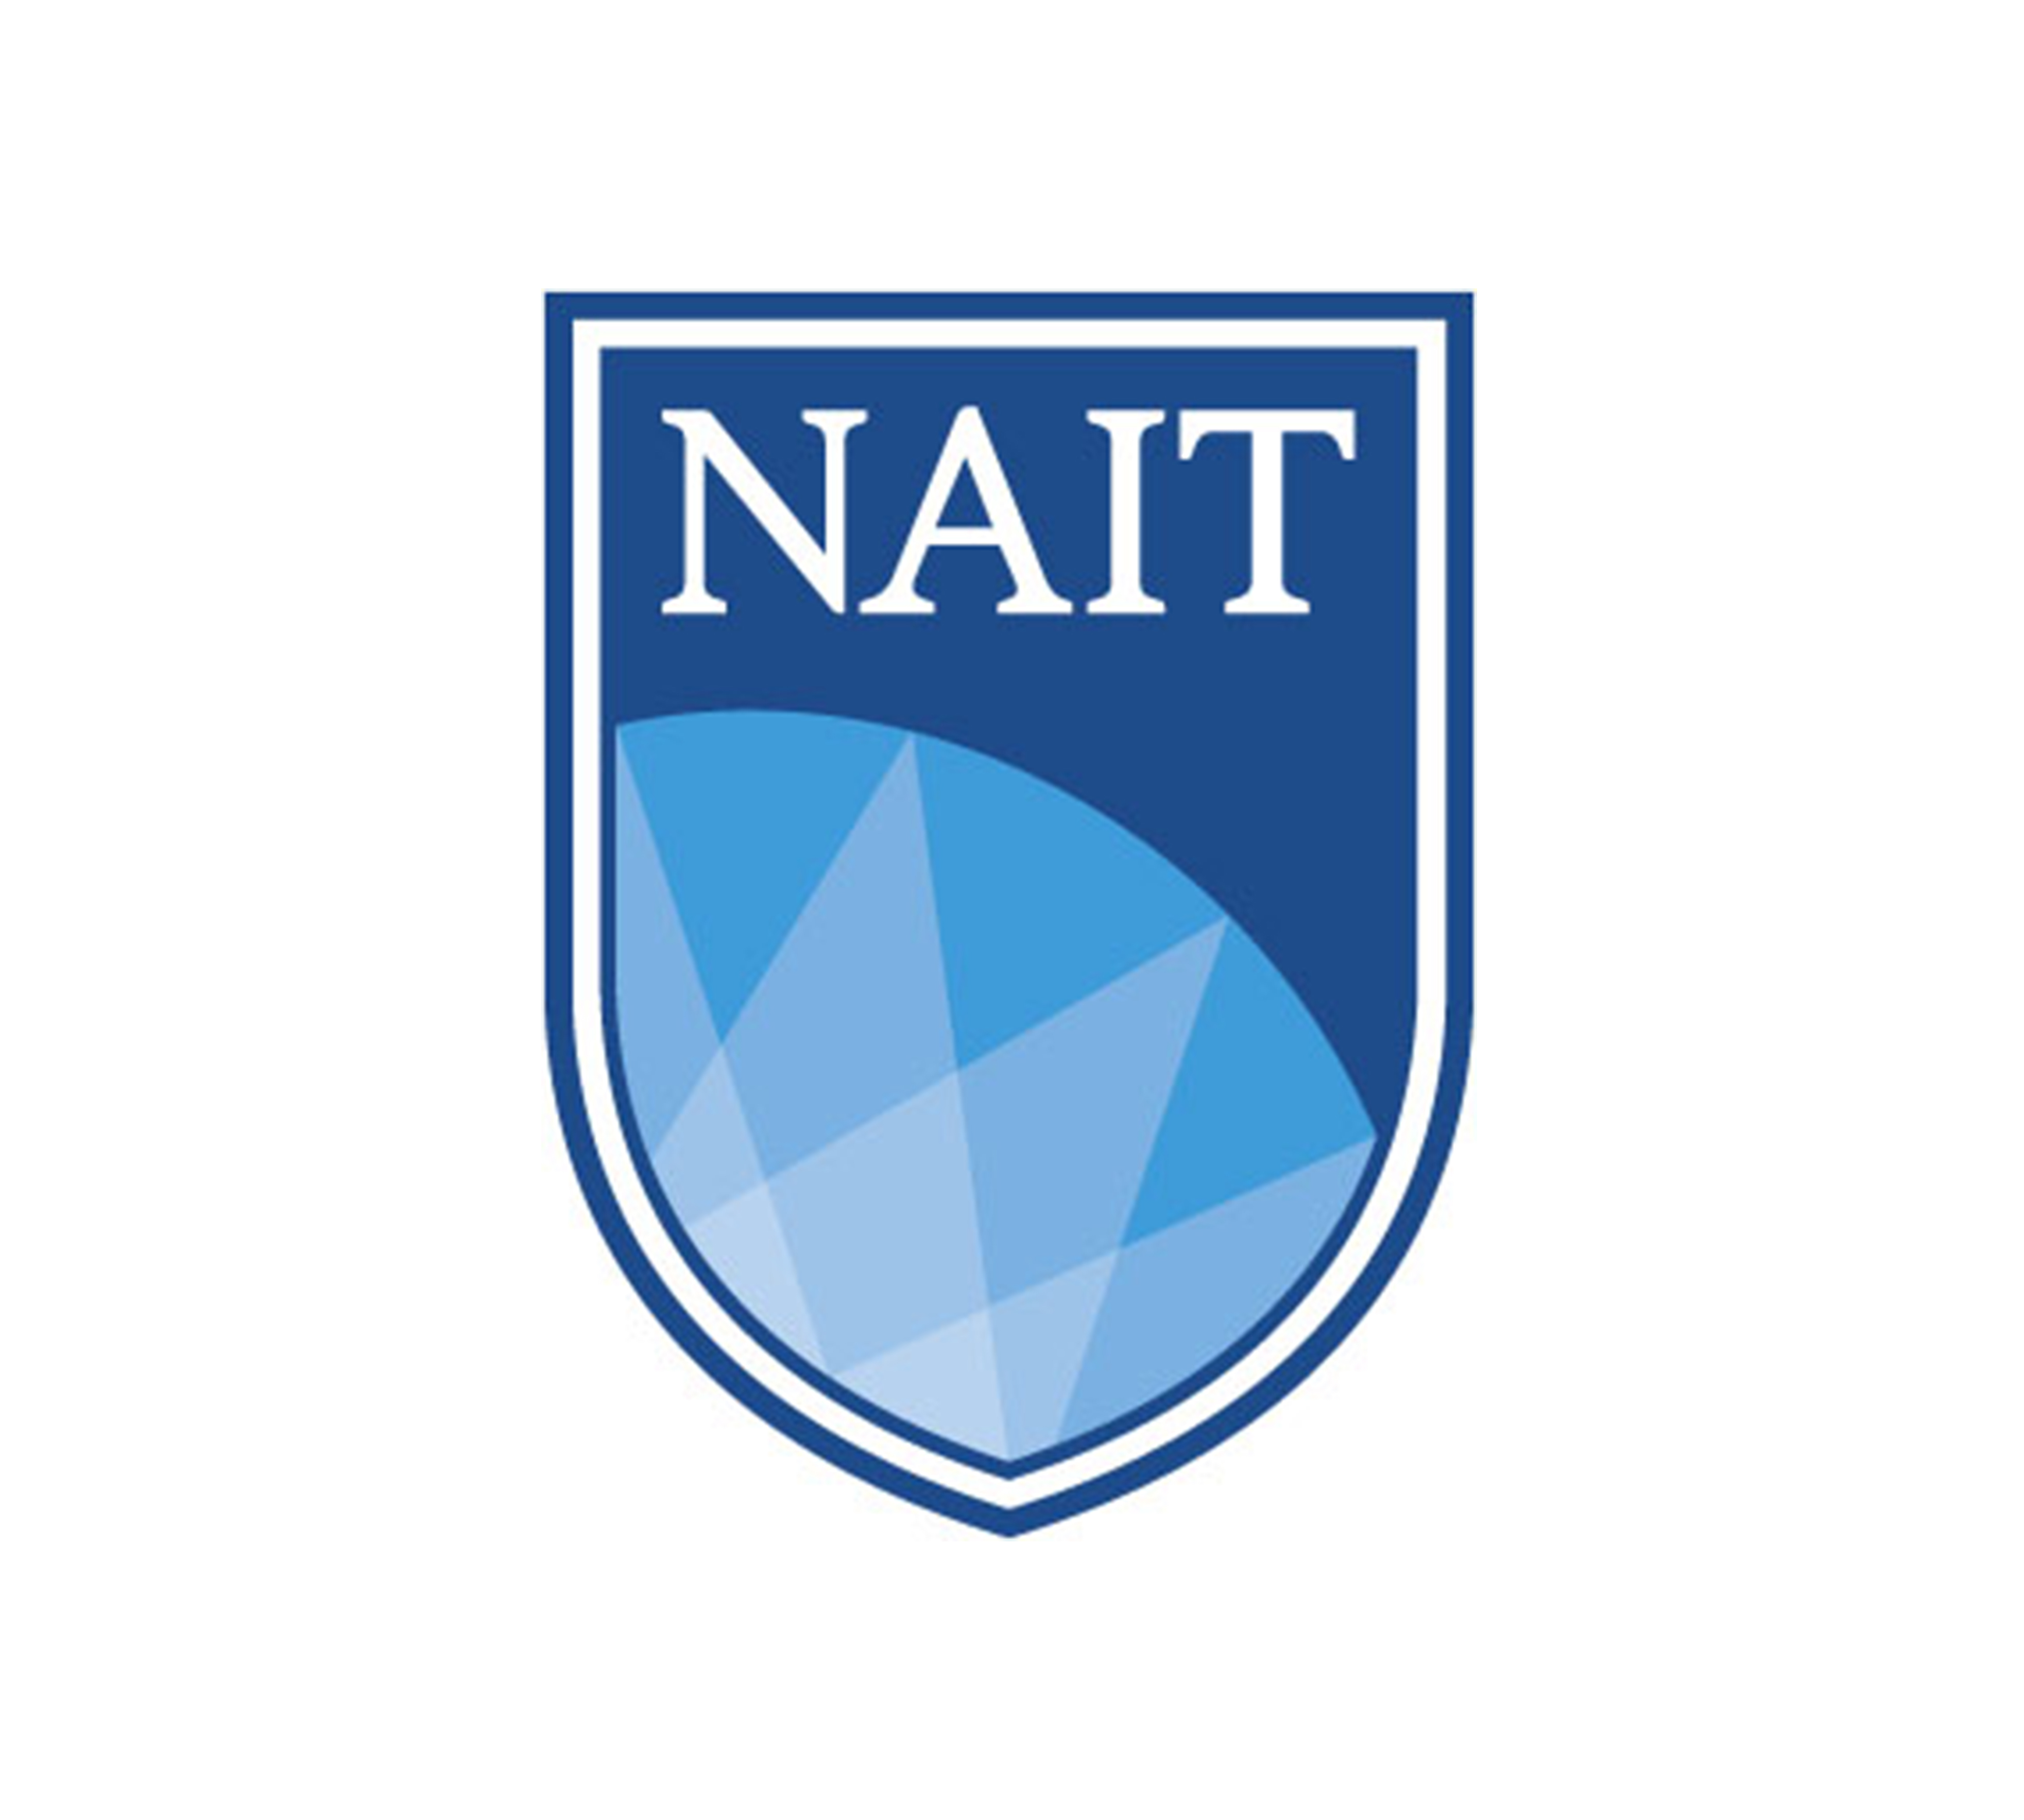 THE NORTHERN ALBERTA INSTITUTE OF TECHNOLOGY - NAIT